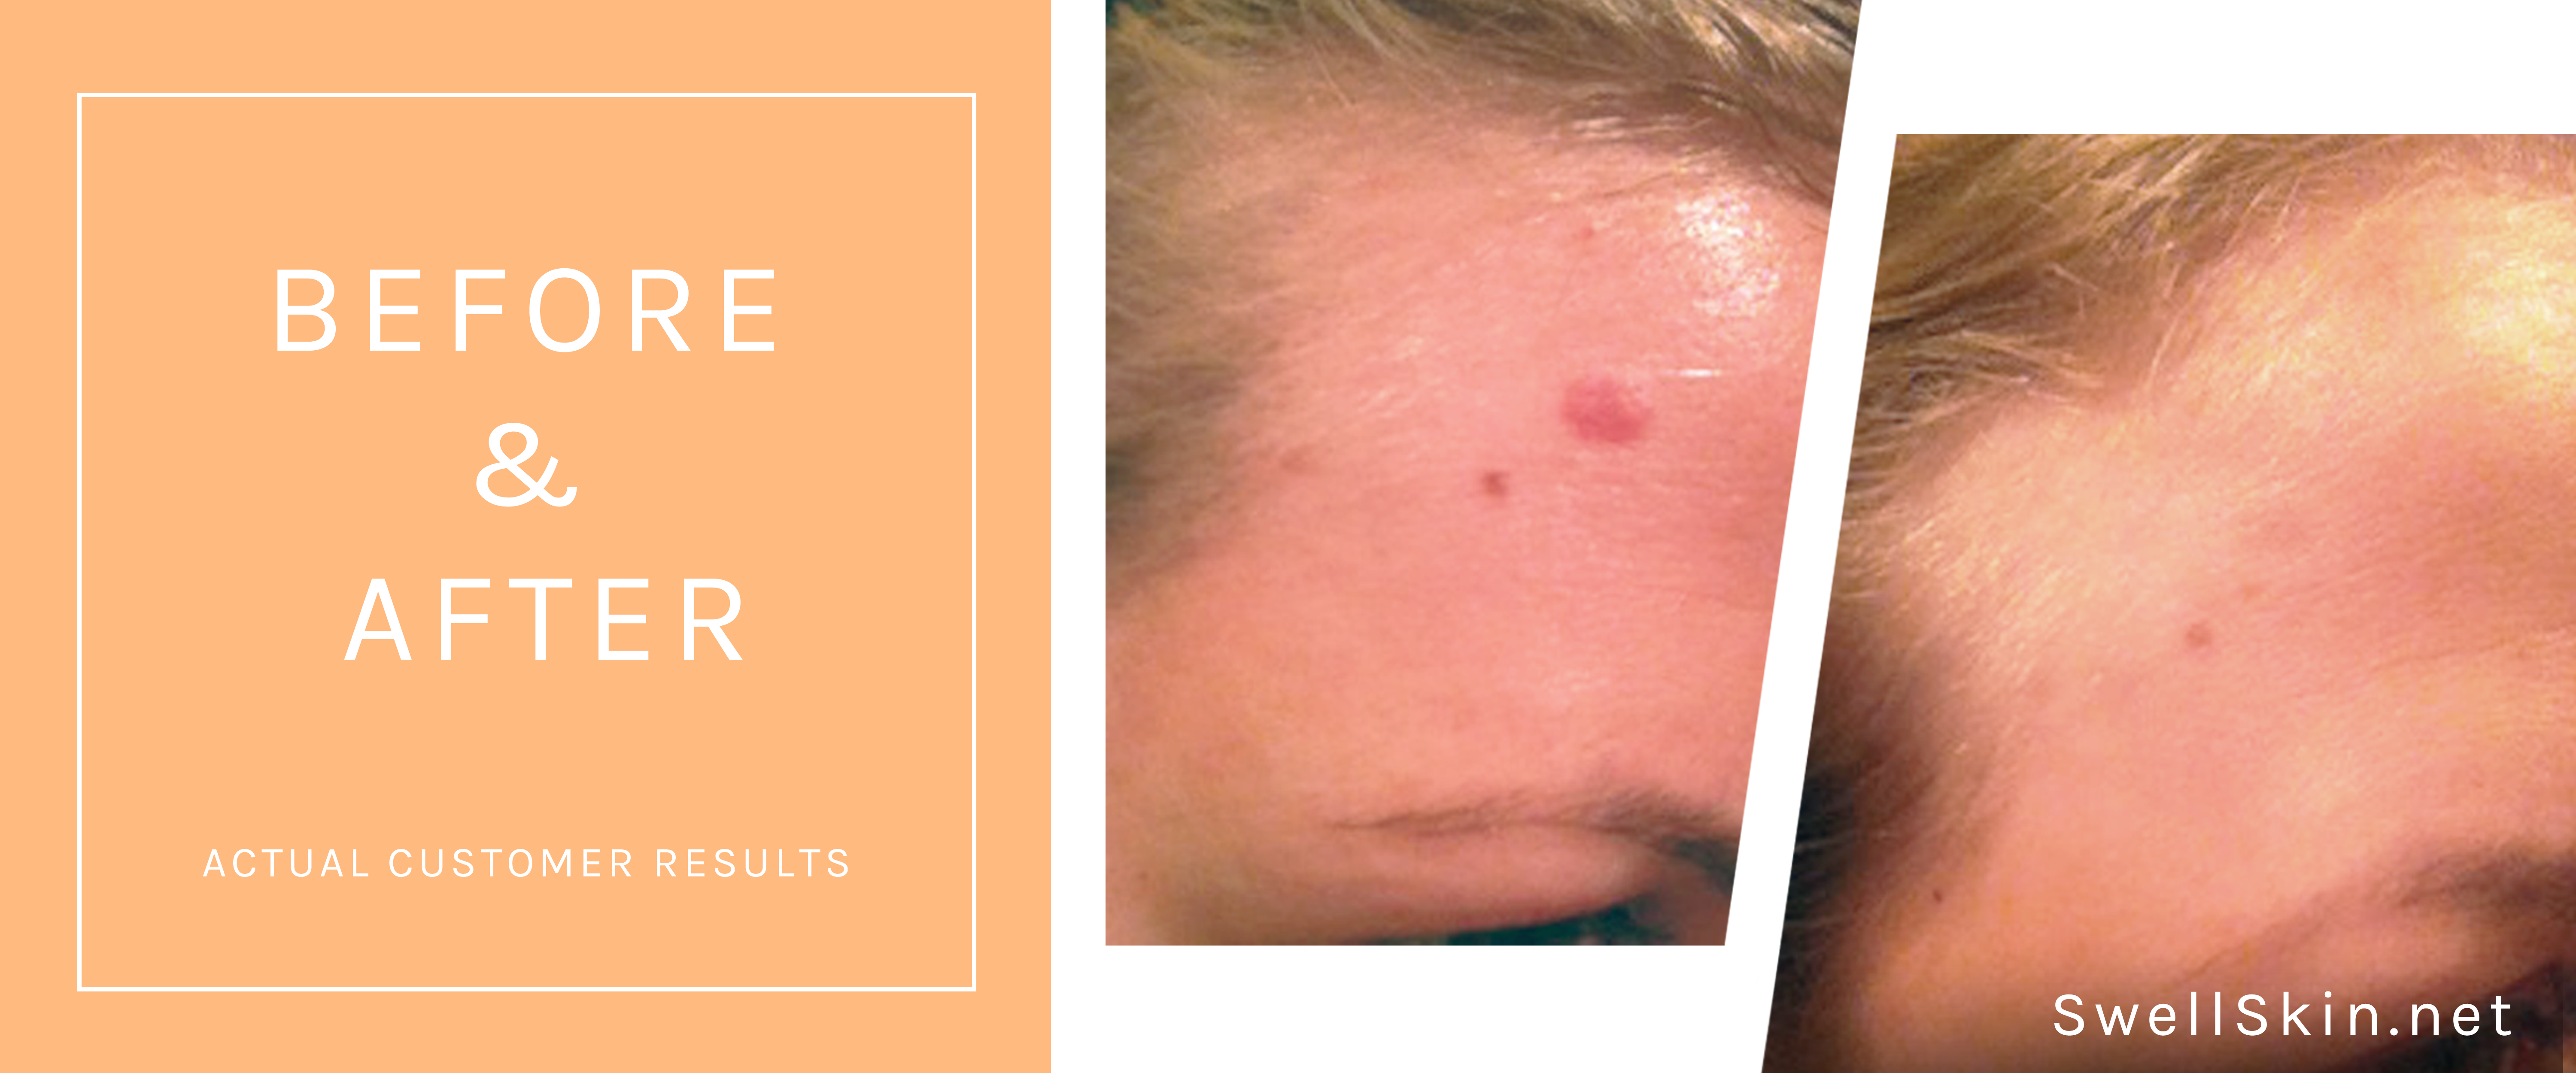 Swell Skin Before & After Photos - Actual Customer Results - Best Skin Ever - Clear Skin - Skincare